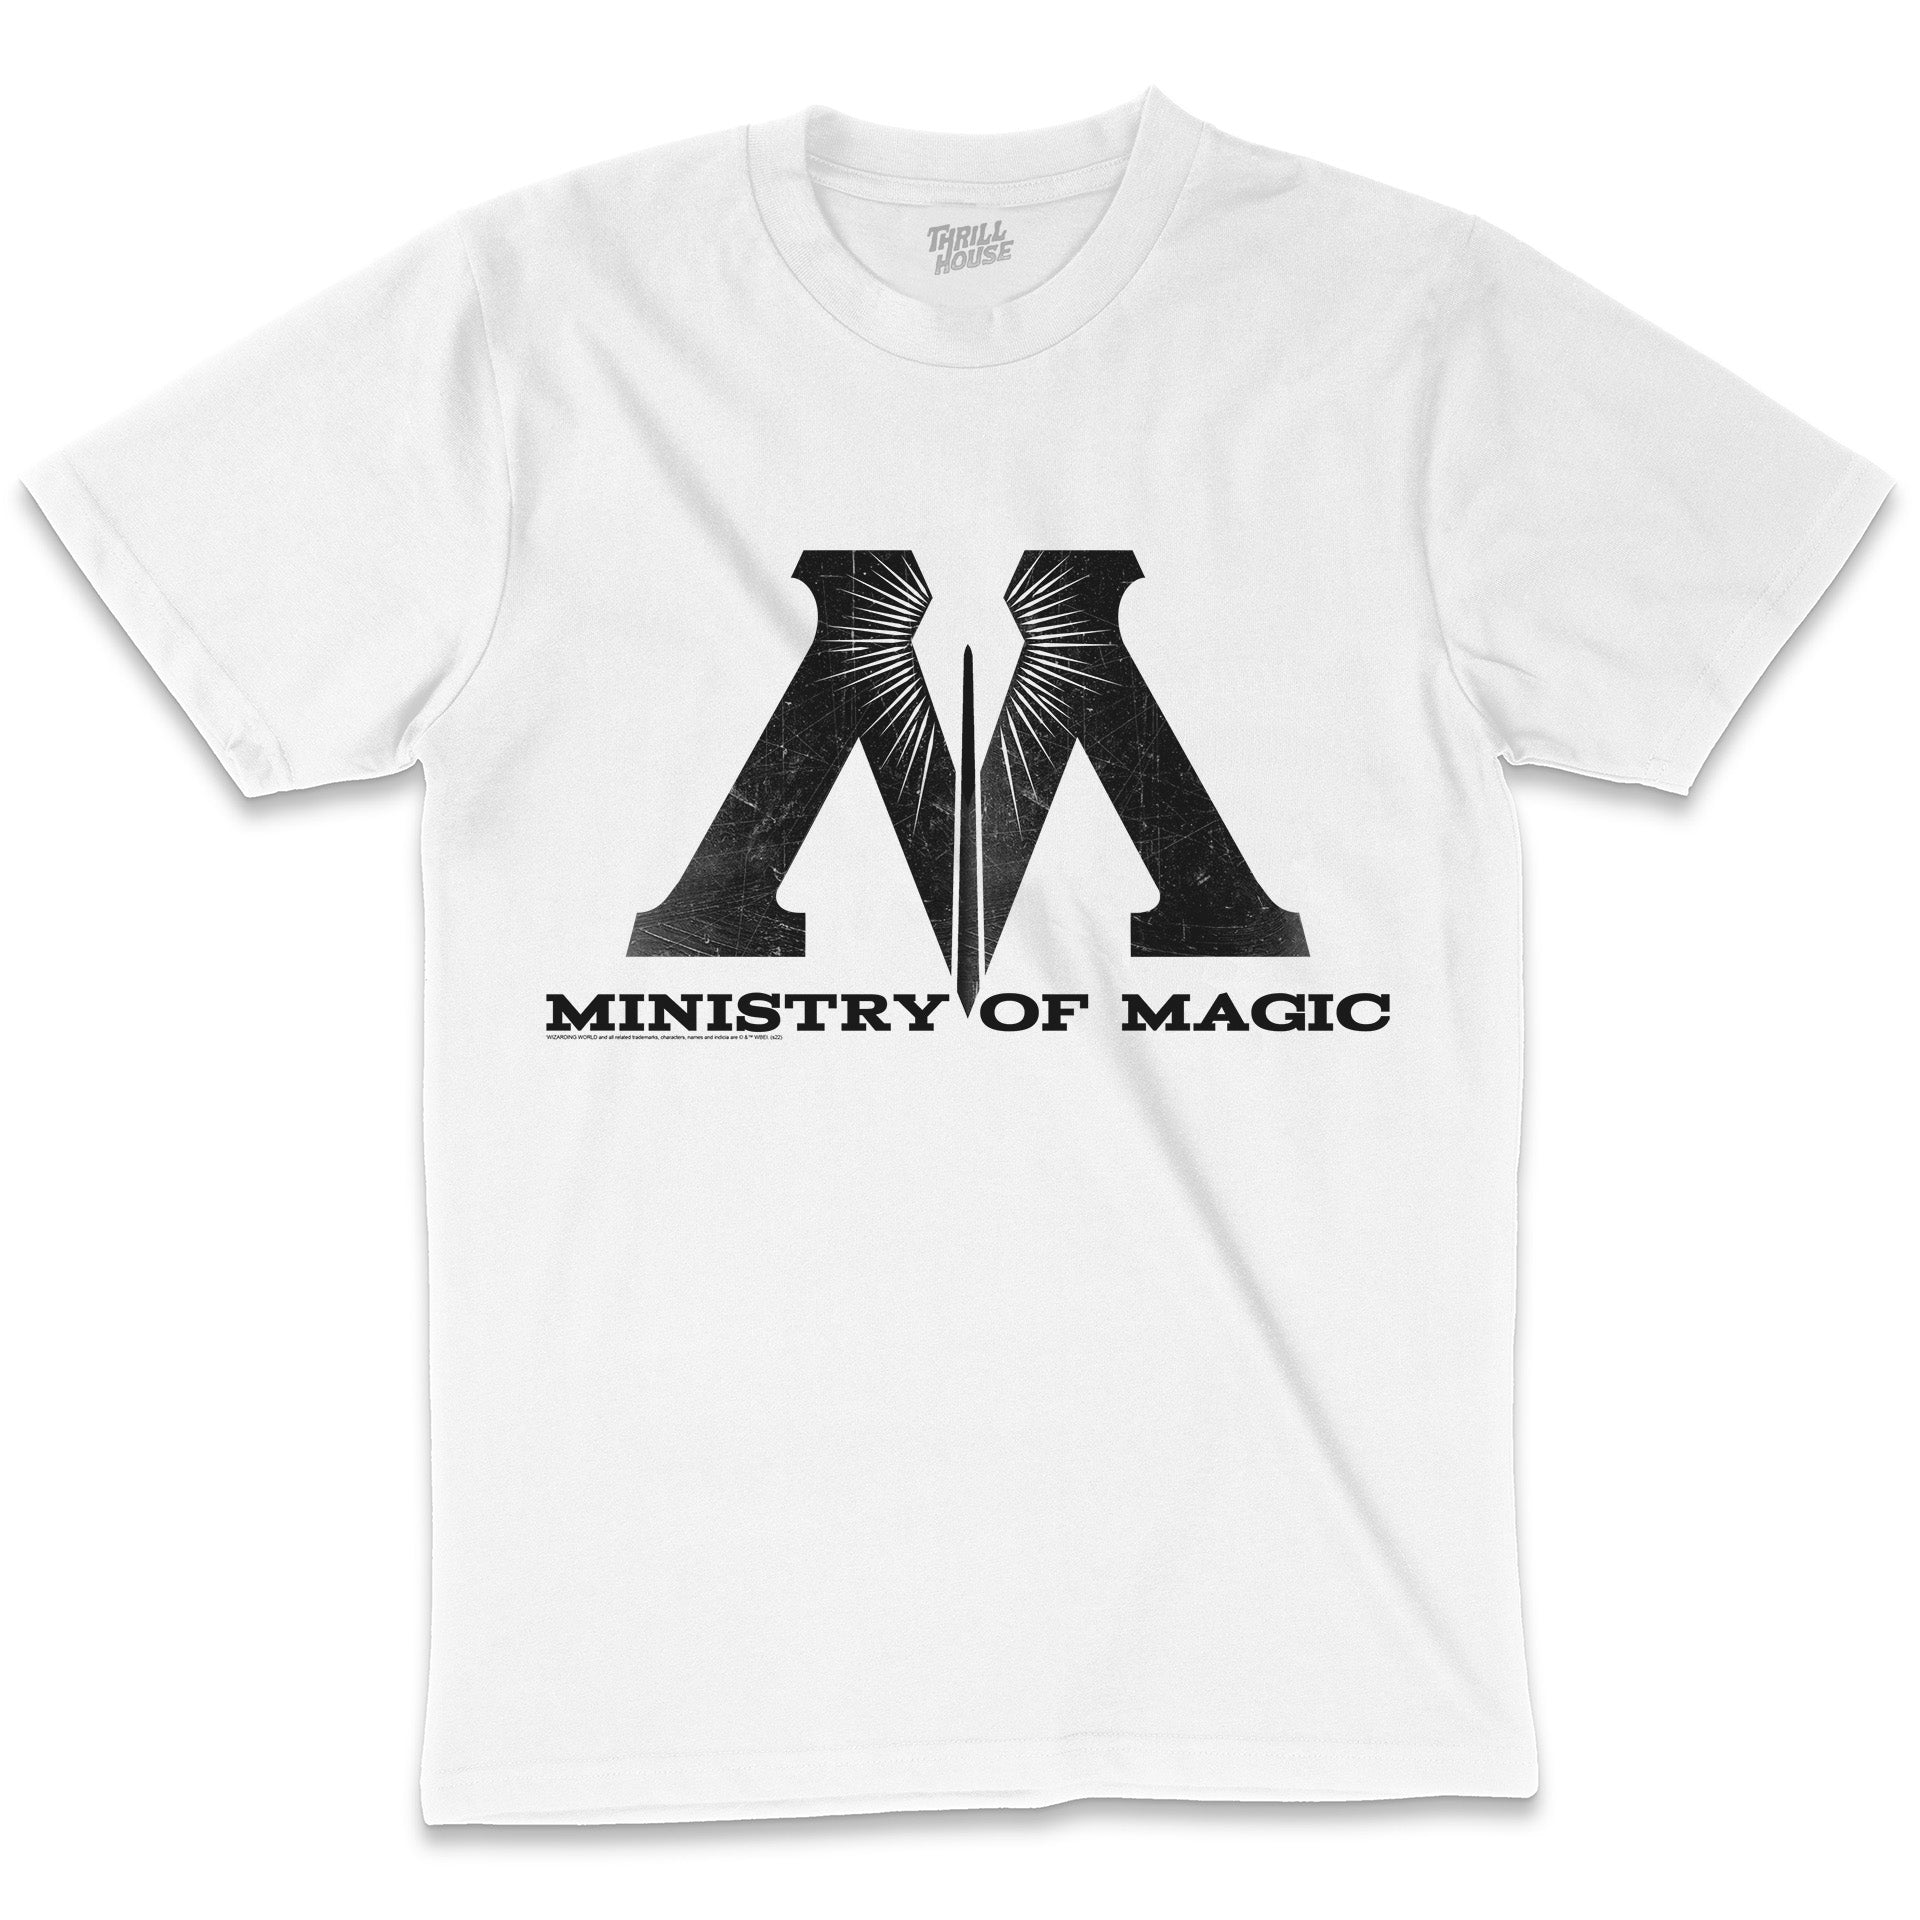 Harry Potter Ministry of Magic Logo Hogwarts Witchcraft Wizardry School Officially Licensed Cotton T-Shirt